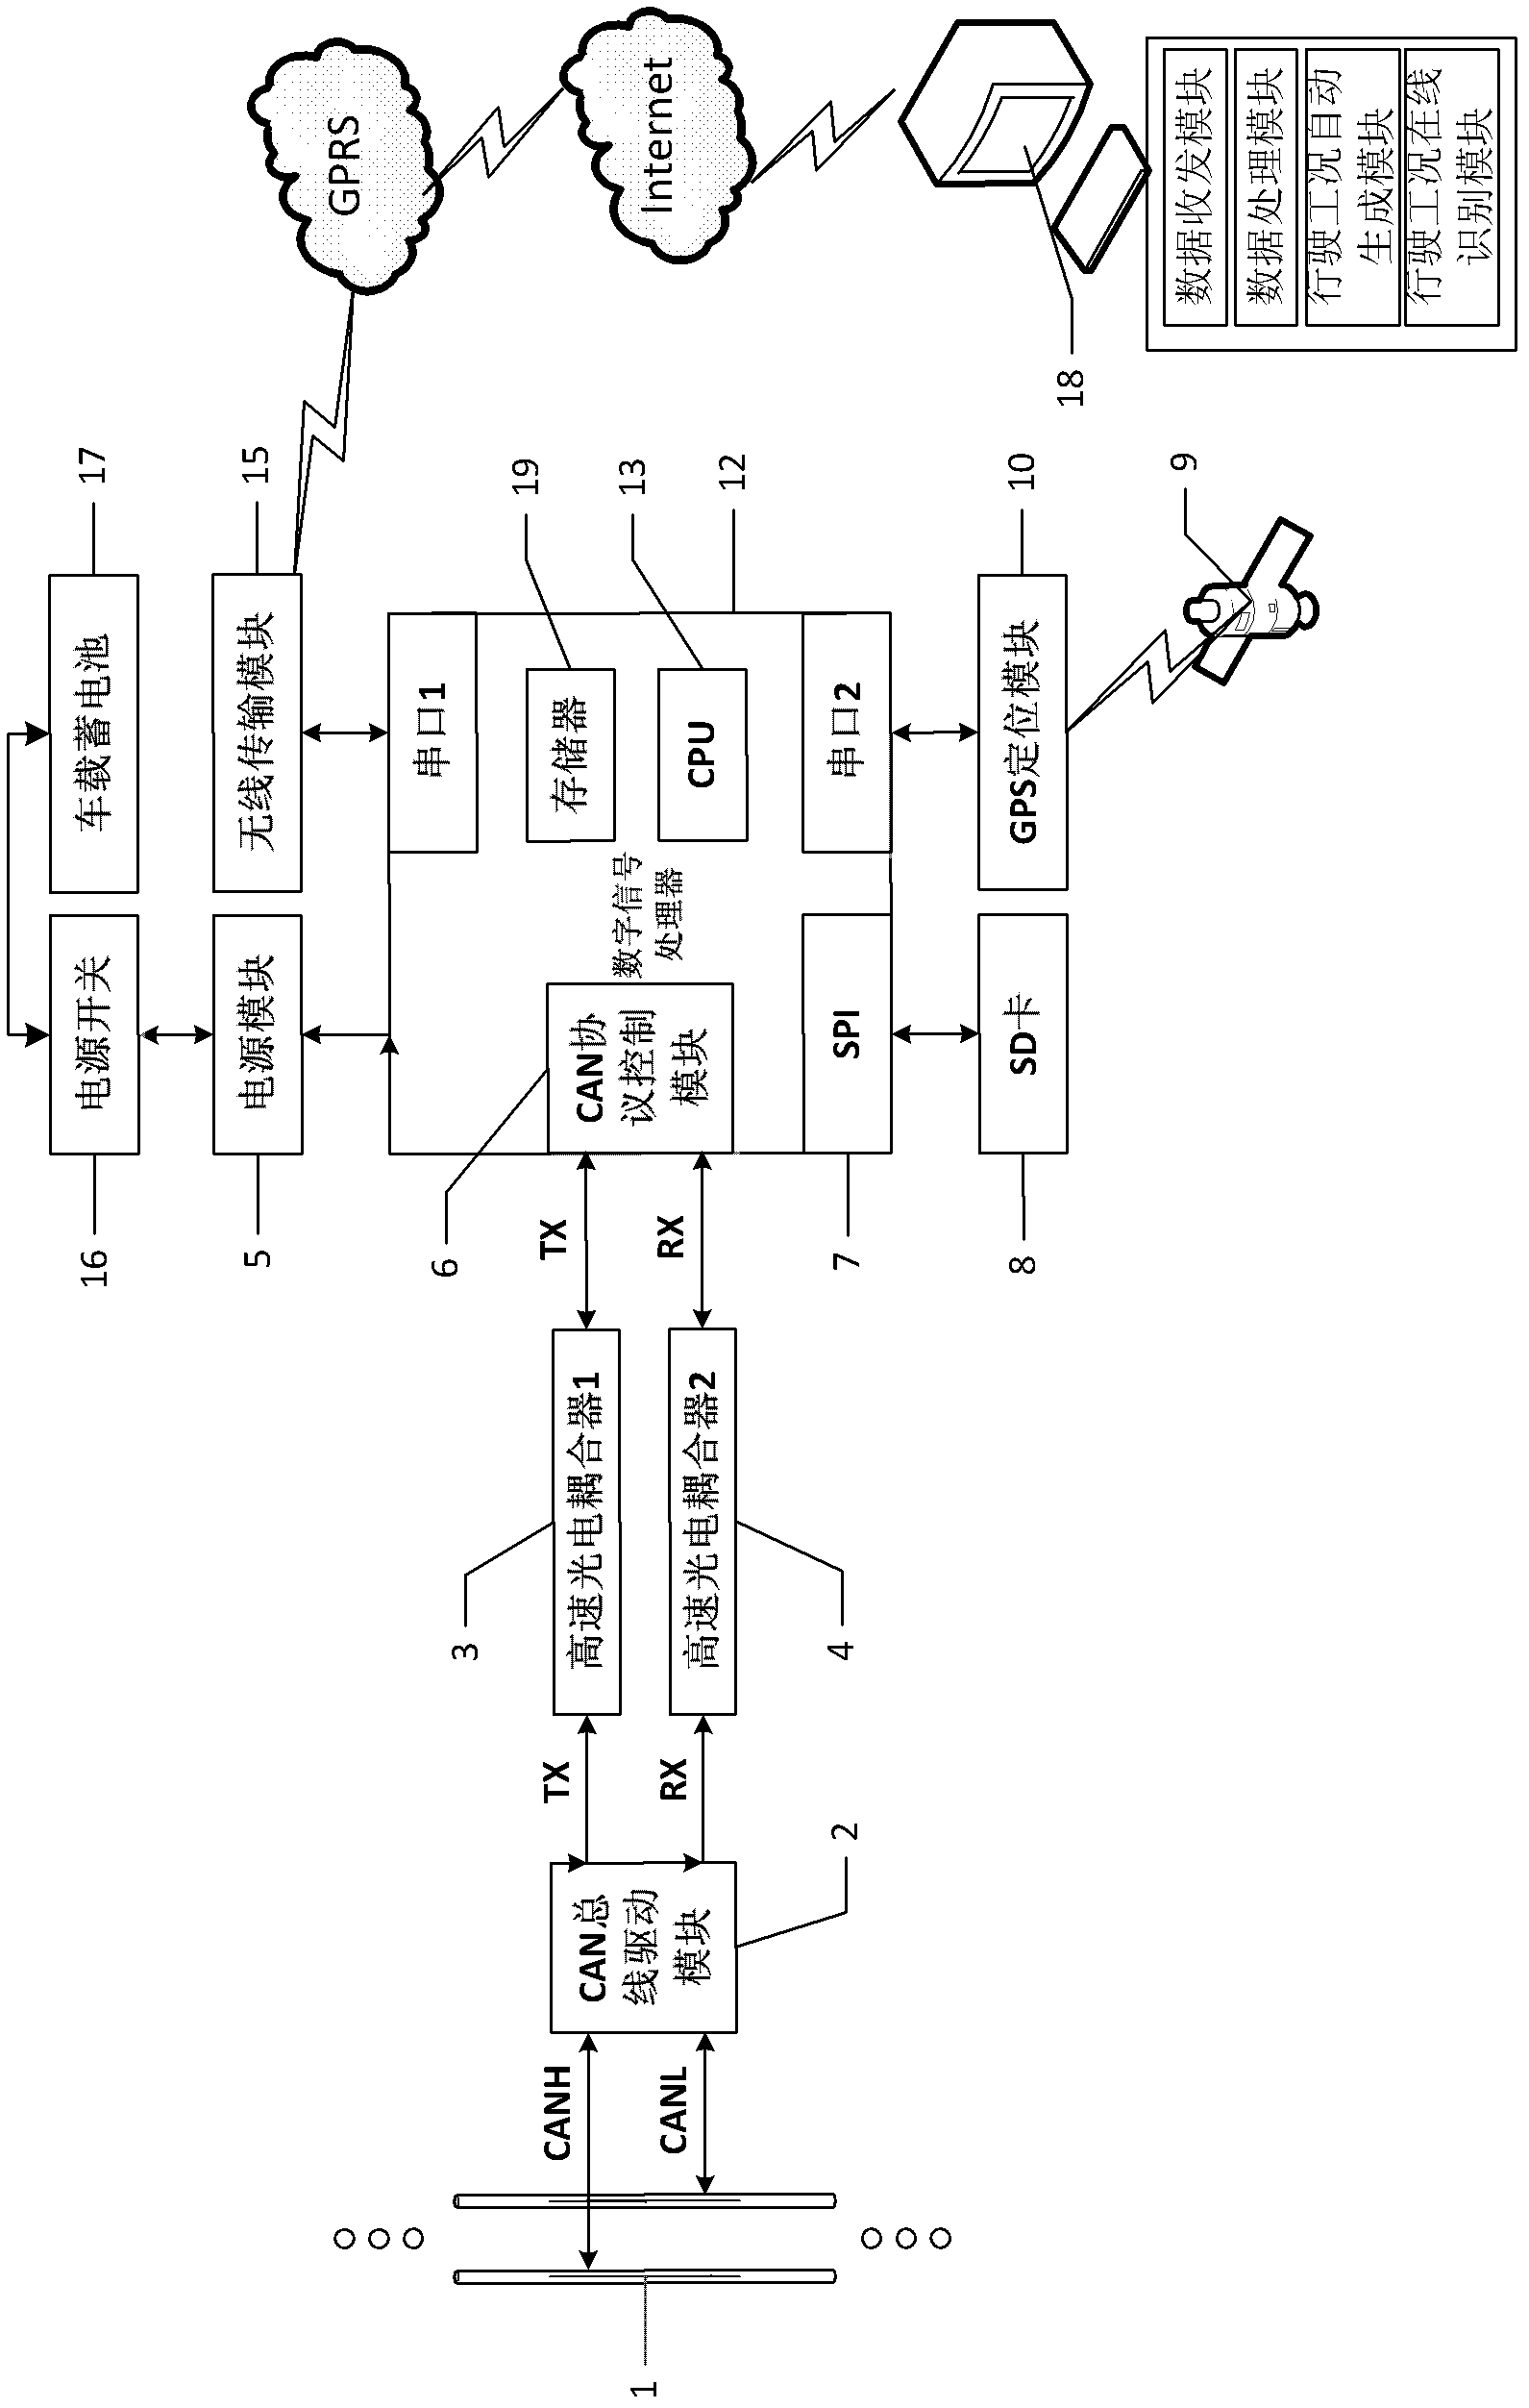 Electromobile data acquisition and management system based on visual instrument